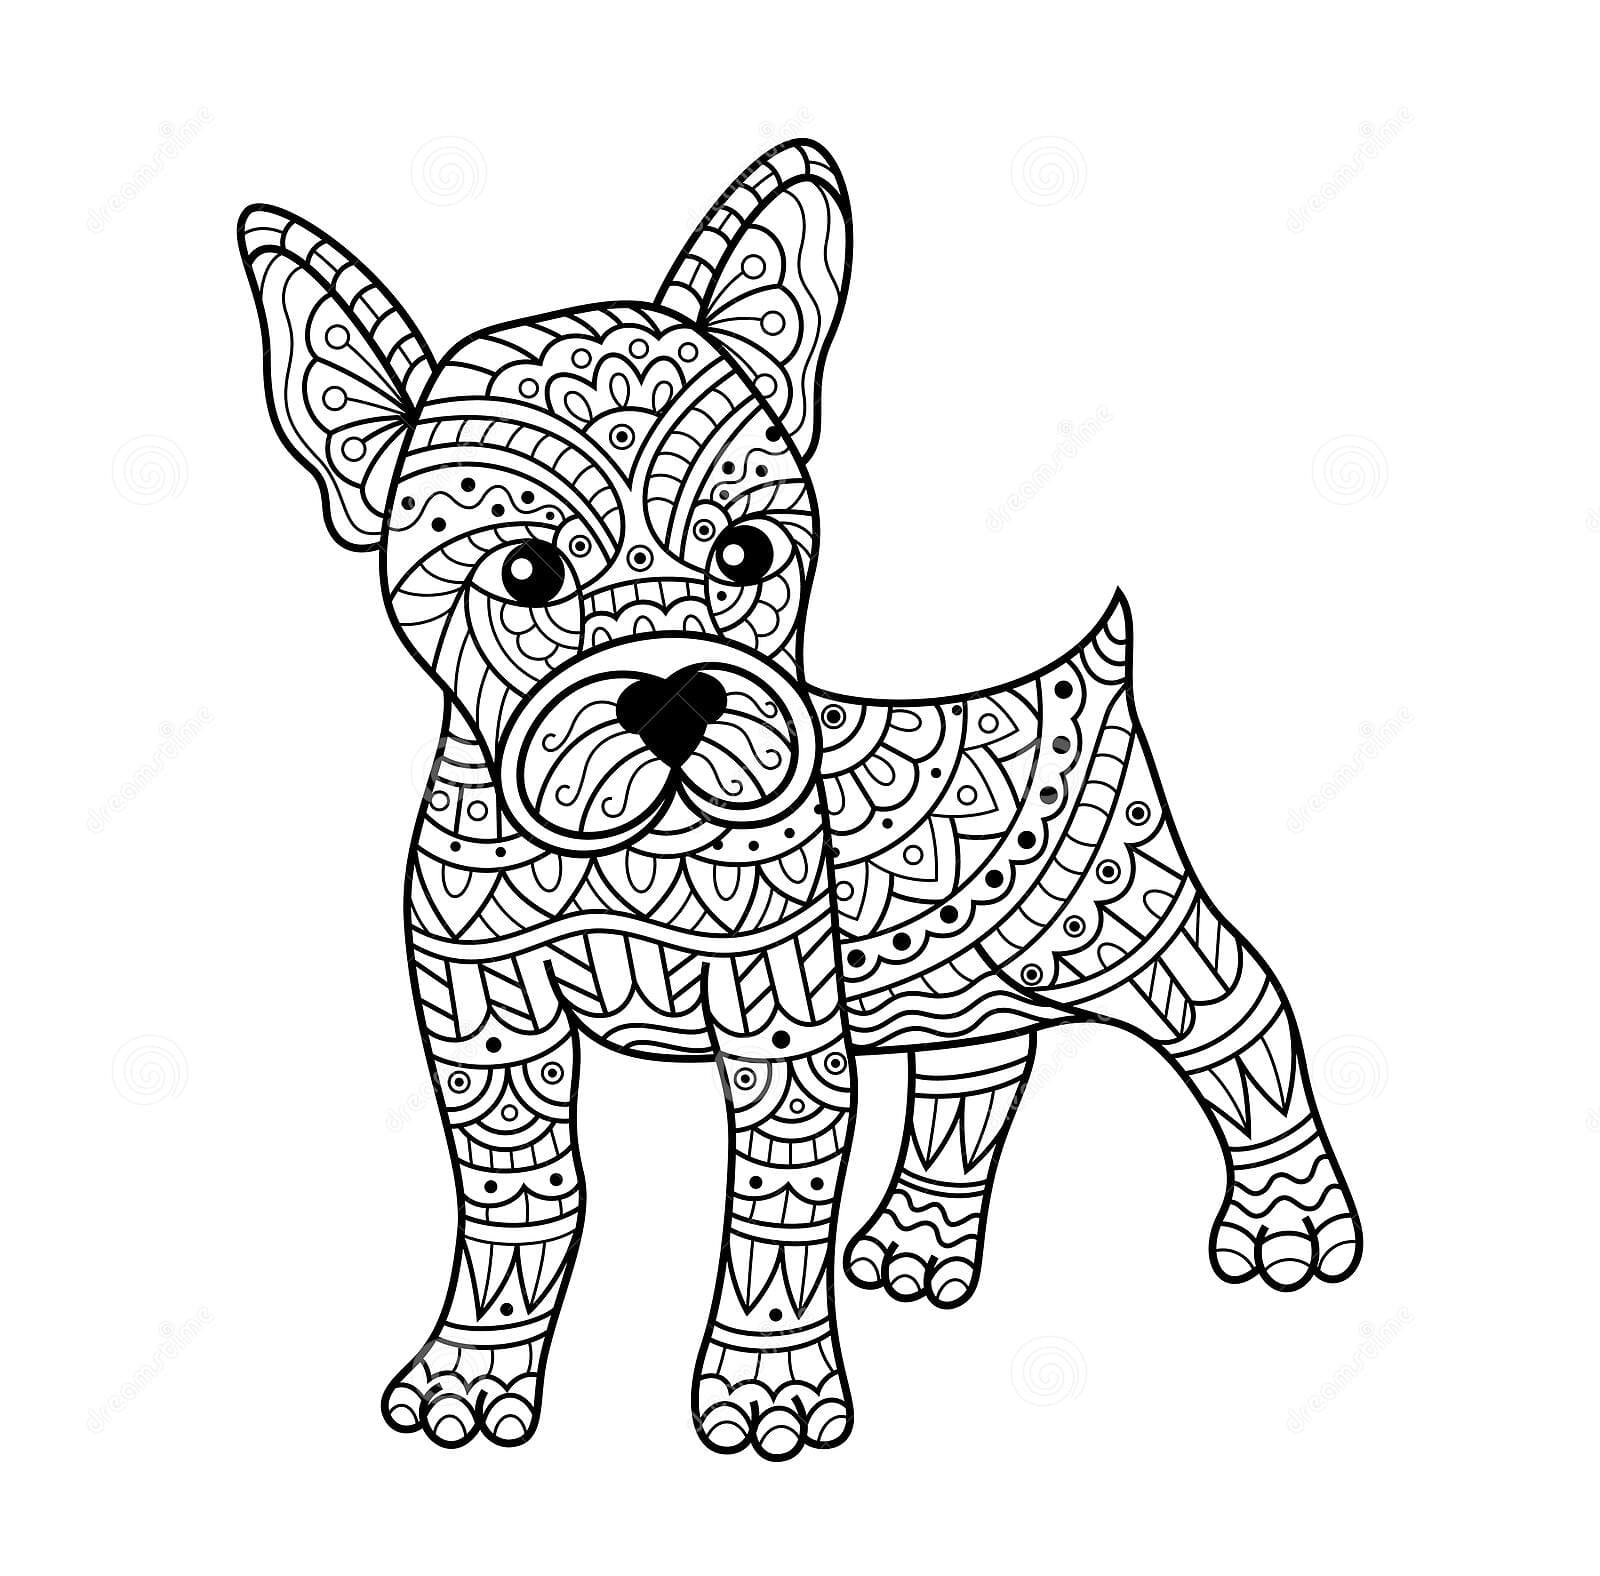 Hand Drawn Of Boston Terrier Dog In Zentangle Style